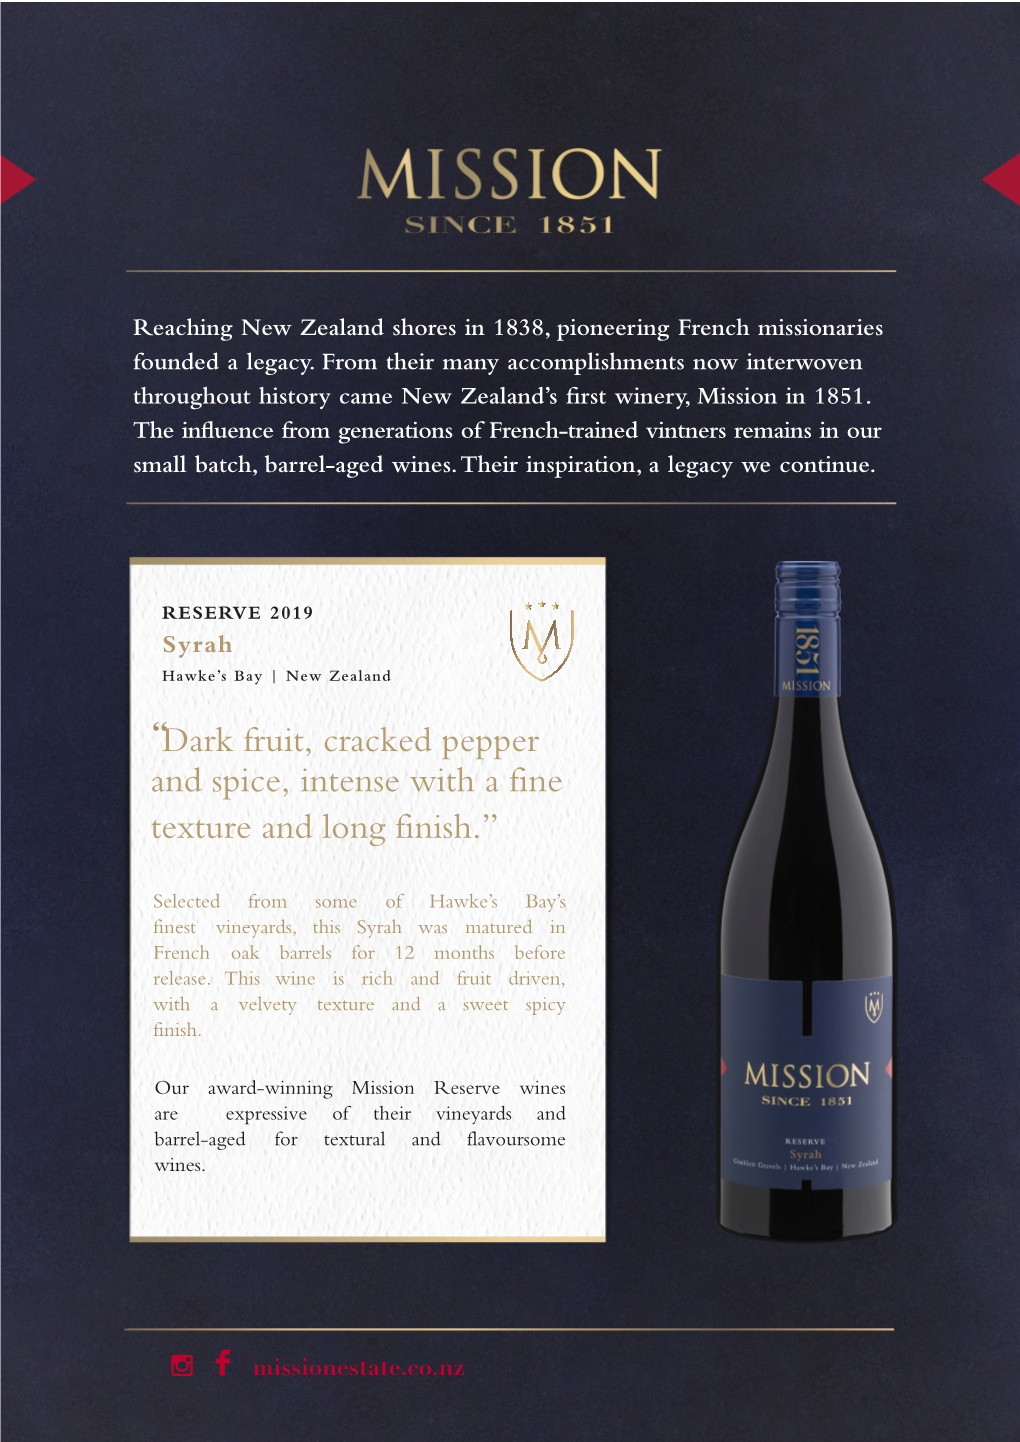 “Dark Fruit, Cracked Pepper and Spice, Intense with a Fine Texture and Long Finish.”